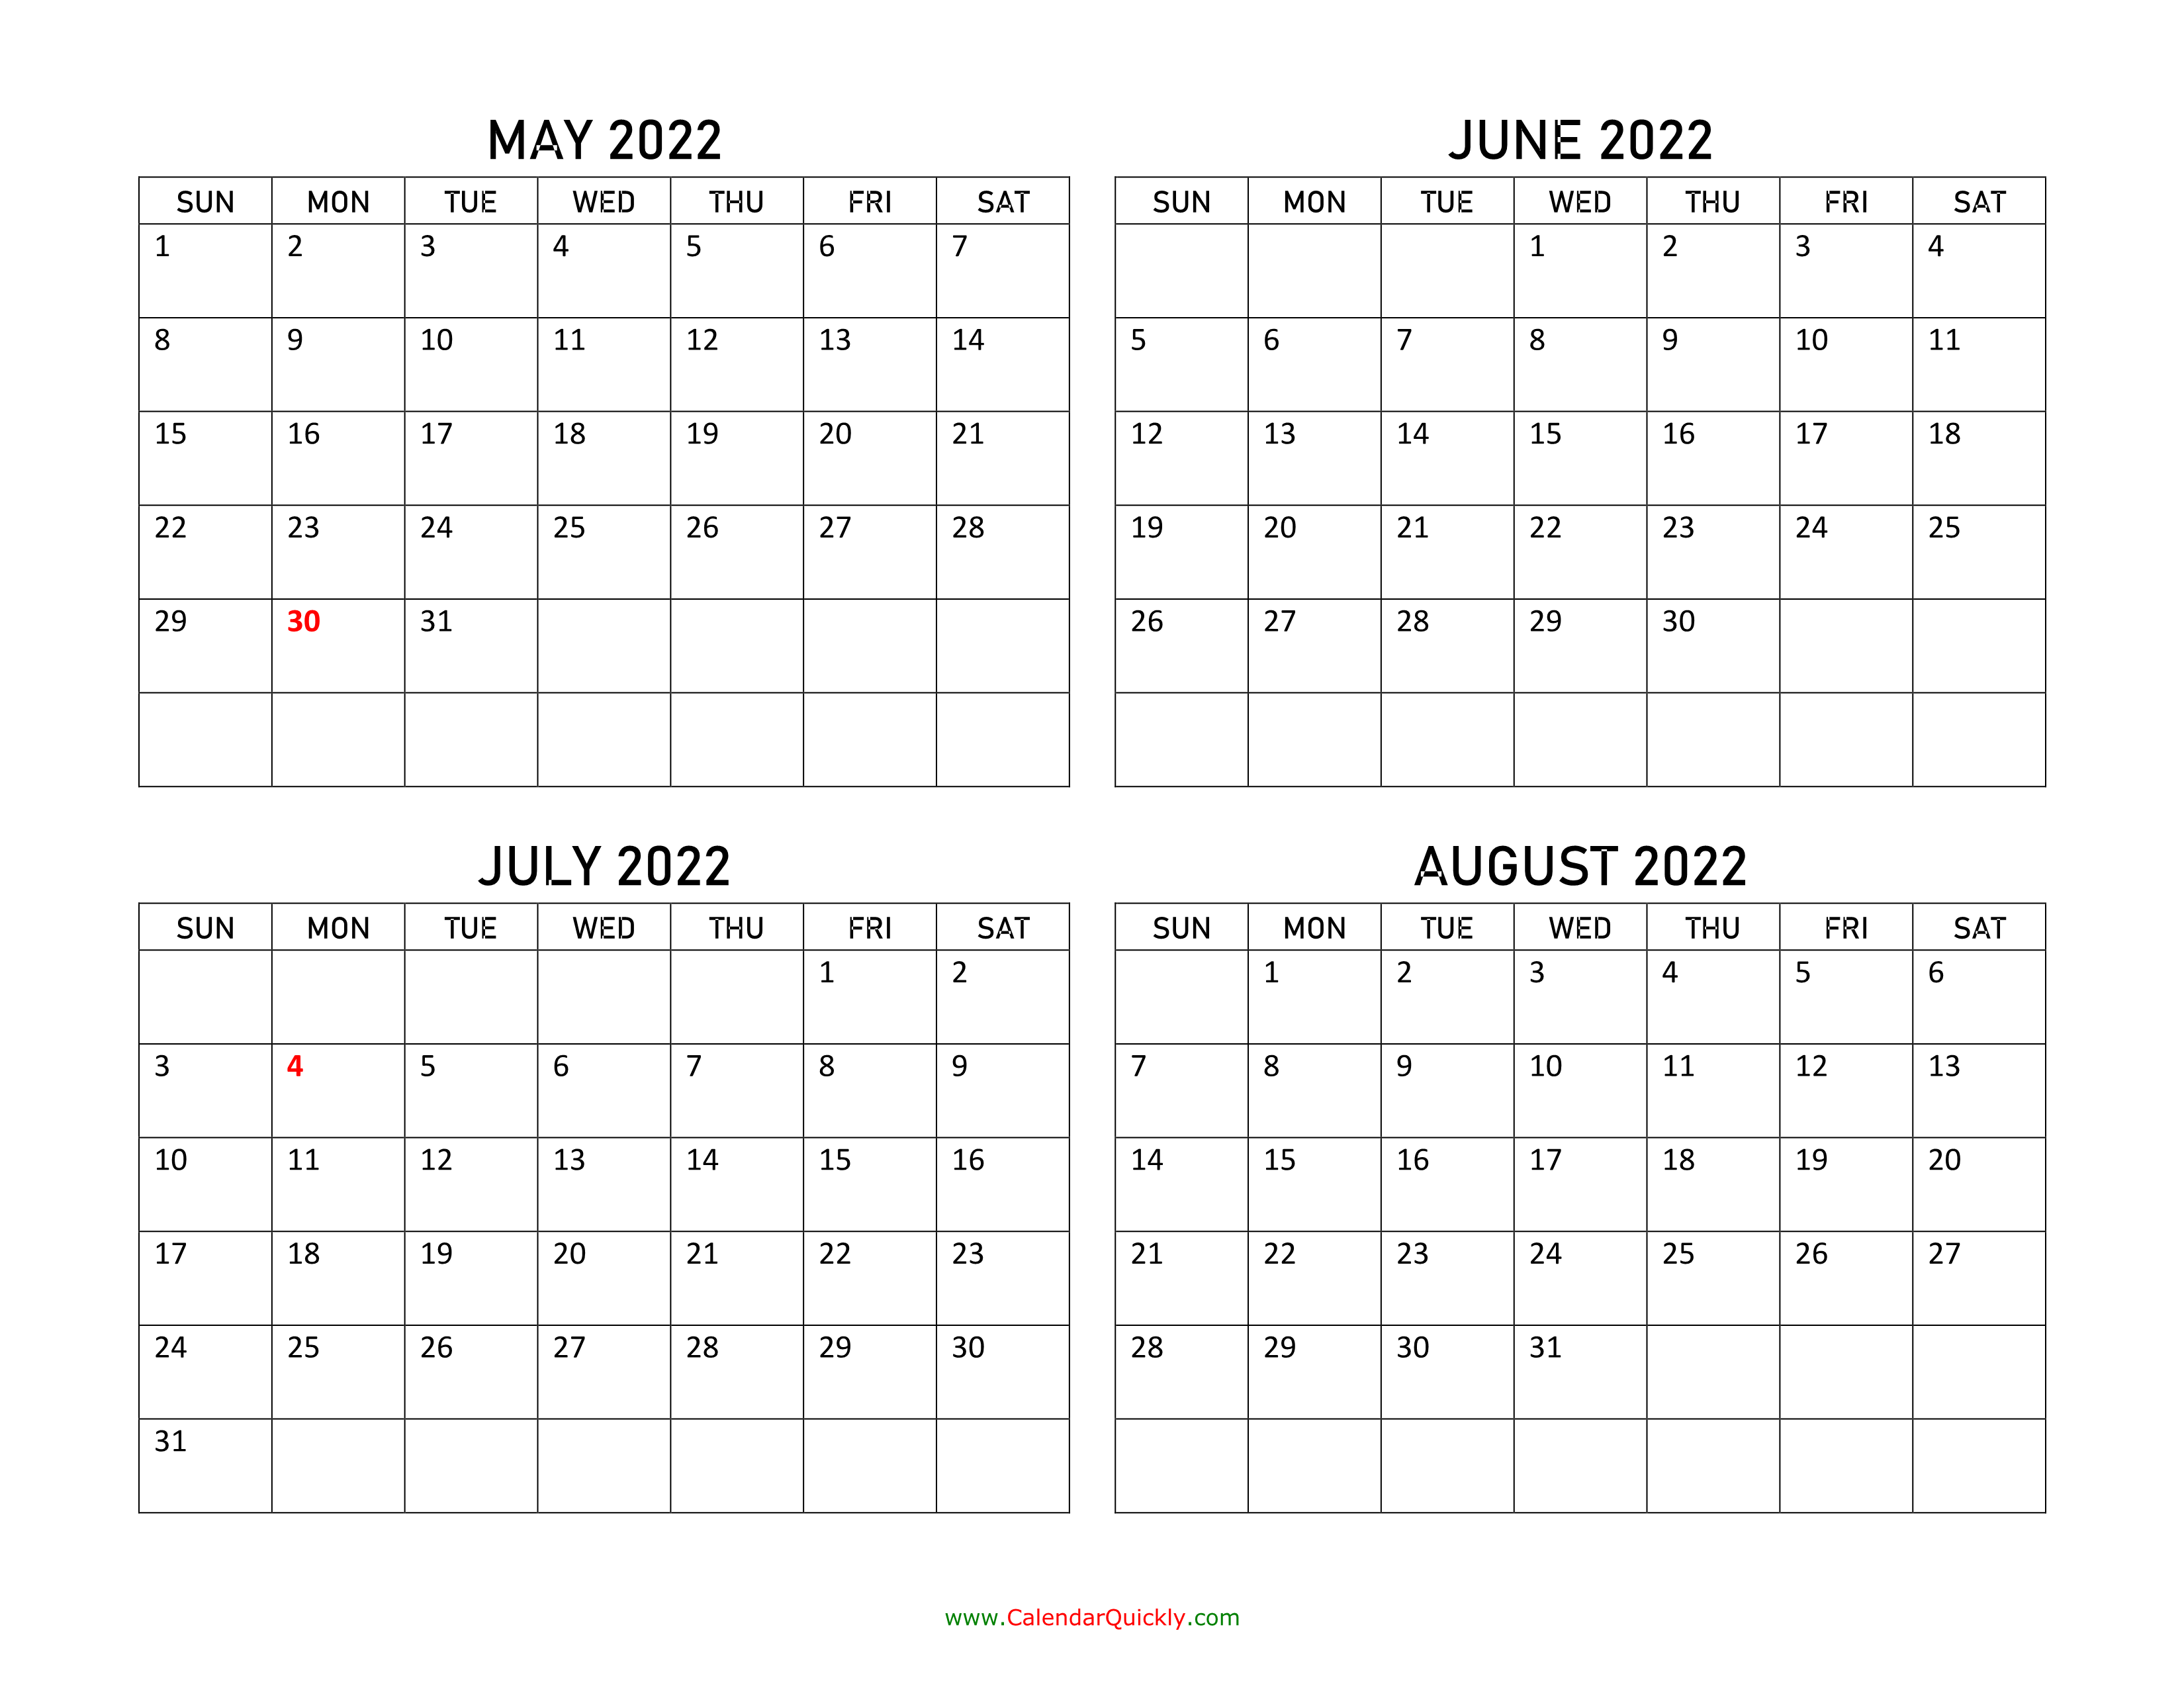 May to August 2022 Calendar Calendar Quickly